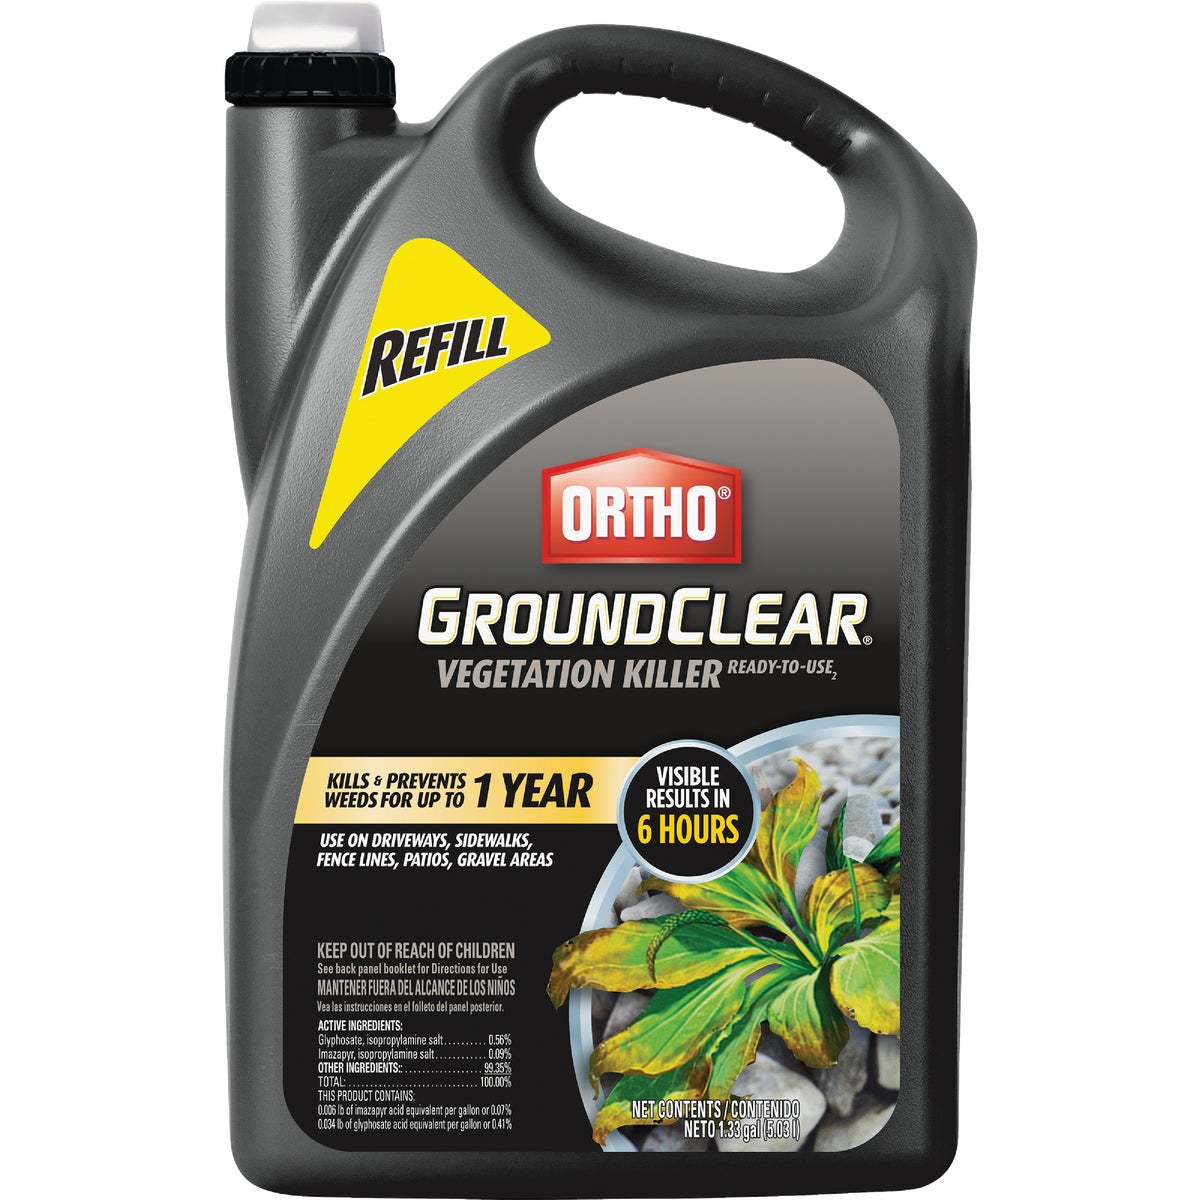 Ortho GroundClear 1 Gal. Ready To Use Refill Vegetation Killer